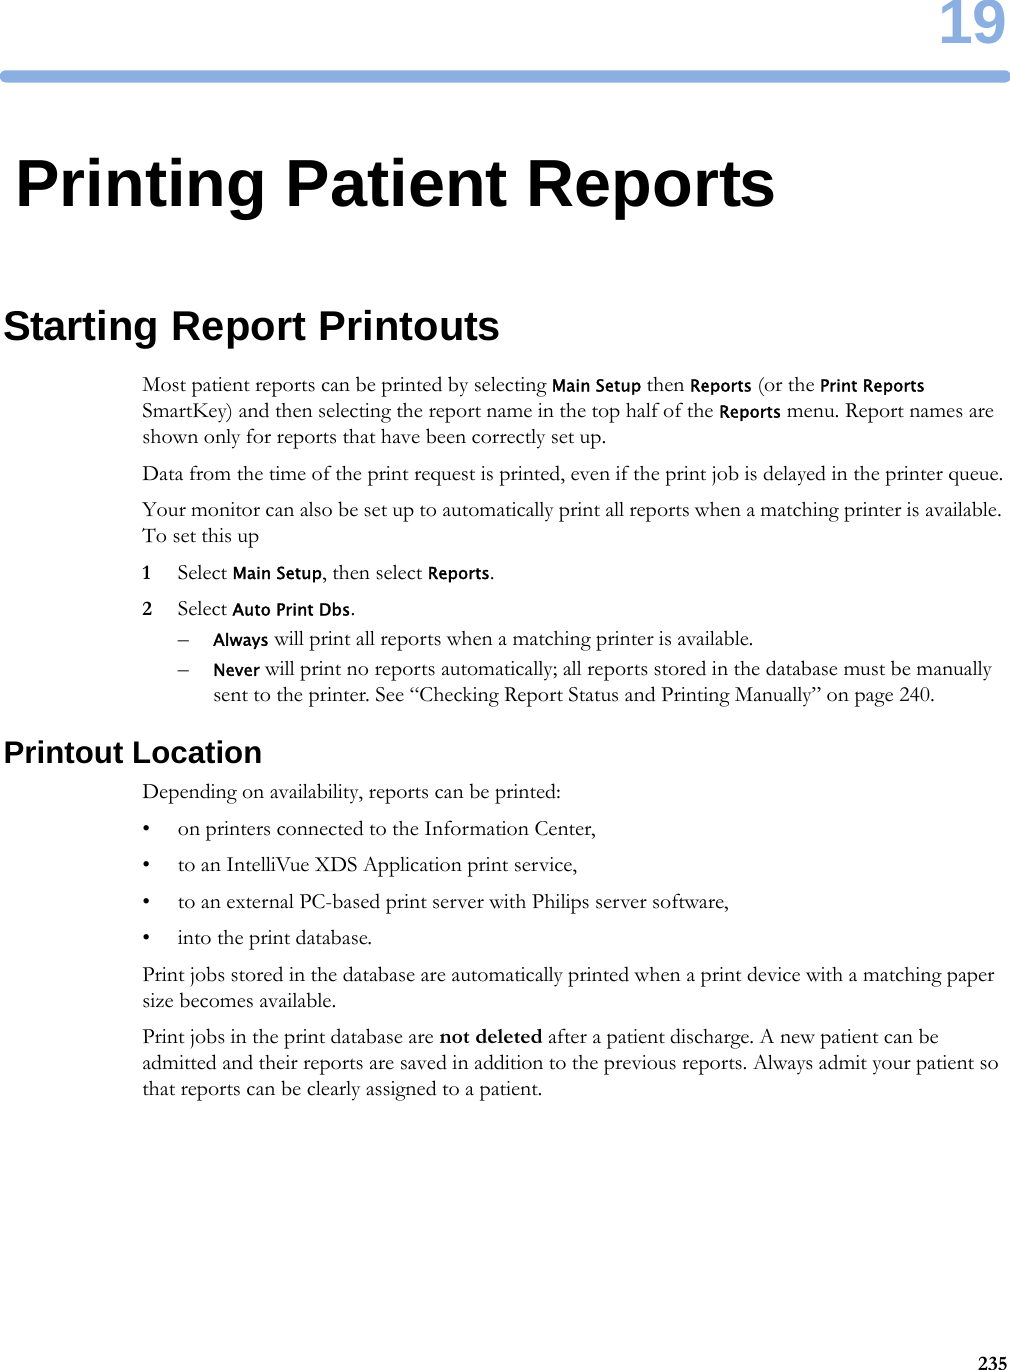 1923519Printing Patient ReportsStarting Report PrintoutsMost patient reports can be printed by selecting Main Setup then Reports (or the Print Reports SmartKey) and then selecting the report name in the top half of the Reports menu. Report names are shown only for reports that have been correctly set up.Data from the time of the print request is printed, even if the print job is delayed in the printer queue.Your monitor can also be set up to automatically print all reports when a matching printer is available. To set this up1Select Main Setup, then select Reports.2Select Auto Print Dbs.–Always will print all reports when a matching printer is available.–Never will print no reports automatically; all reports stored in the database must be manually sent to the printer. See “Checking Report Status and Printing Manually” on page 240.Printout LocationDepending on availability, reports can be printed:• on printers connected to the Information Center,• to an IntelliVue XDS Application print service,• to an external PC-based print server with Philips server software,• into the print database.Print jobs stored in the database are automatically printed when a print device with a matching paper size becomes available.Print jobs in the print database are not deleted after a patient discharge. A new patient can be admitted and their reports are saved in addition to the previous reports. Always admit your patient so that reports can be clearly assigned to a patient.